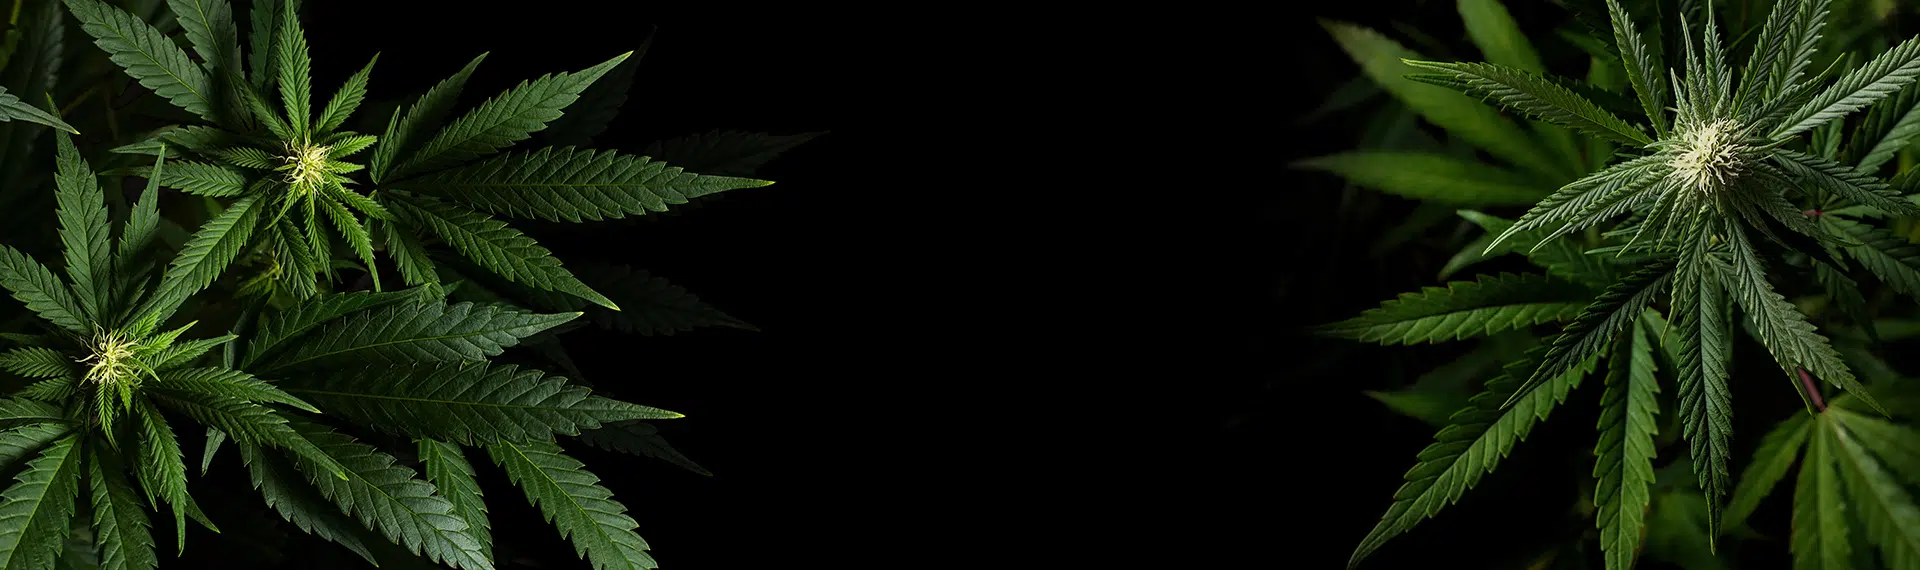 Cannabis leaves on a dark background